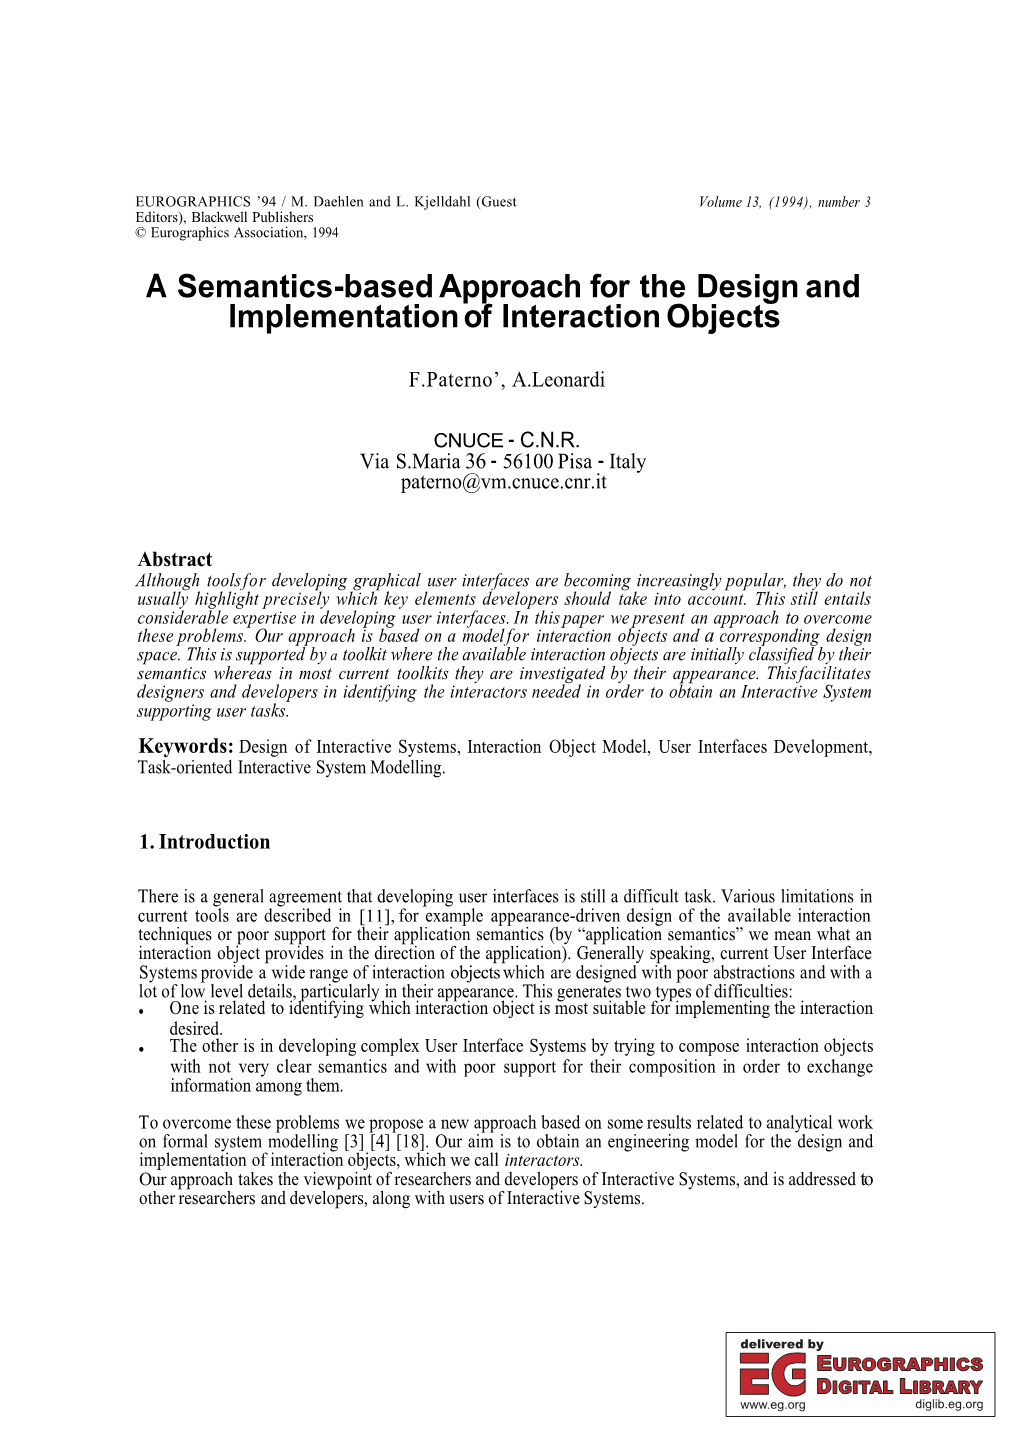 A Semantics-Based Approach for the Design and Implementation of Interaction Objects